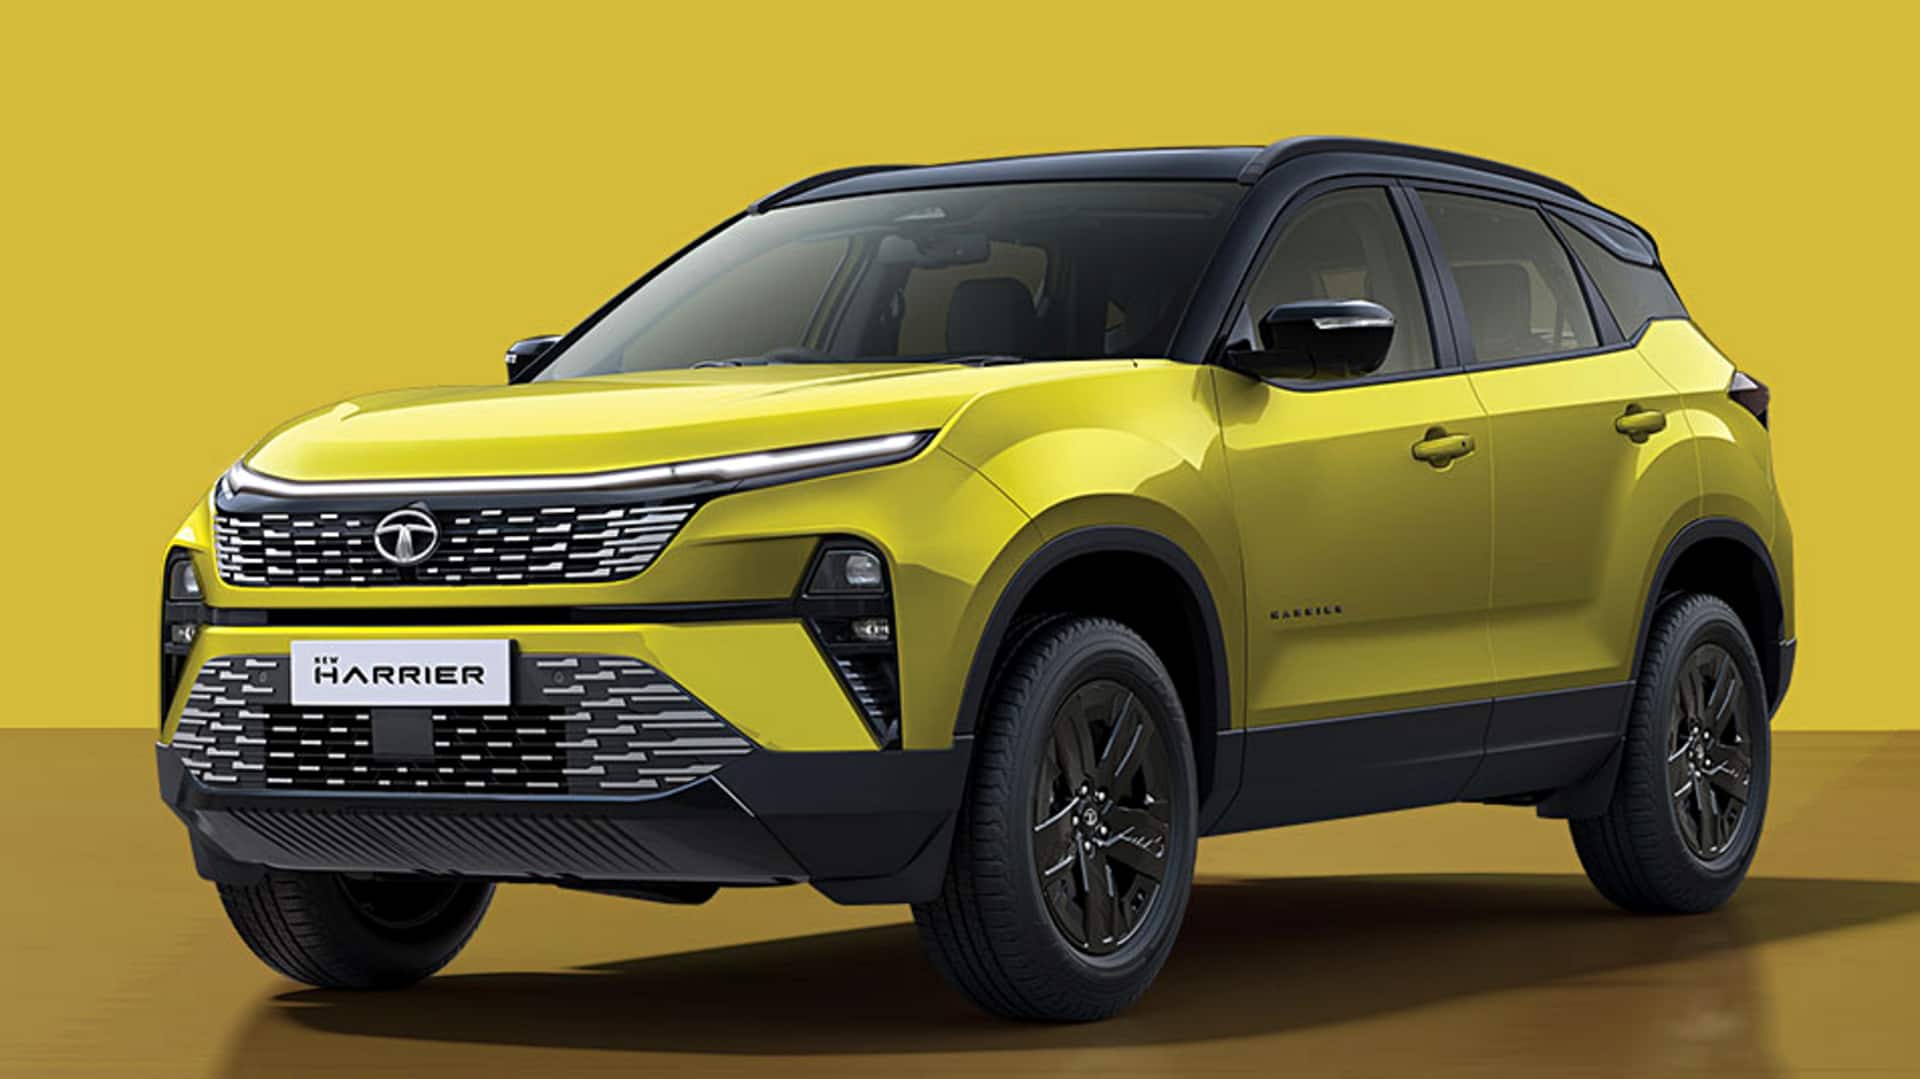 These new cars are launching in India next year